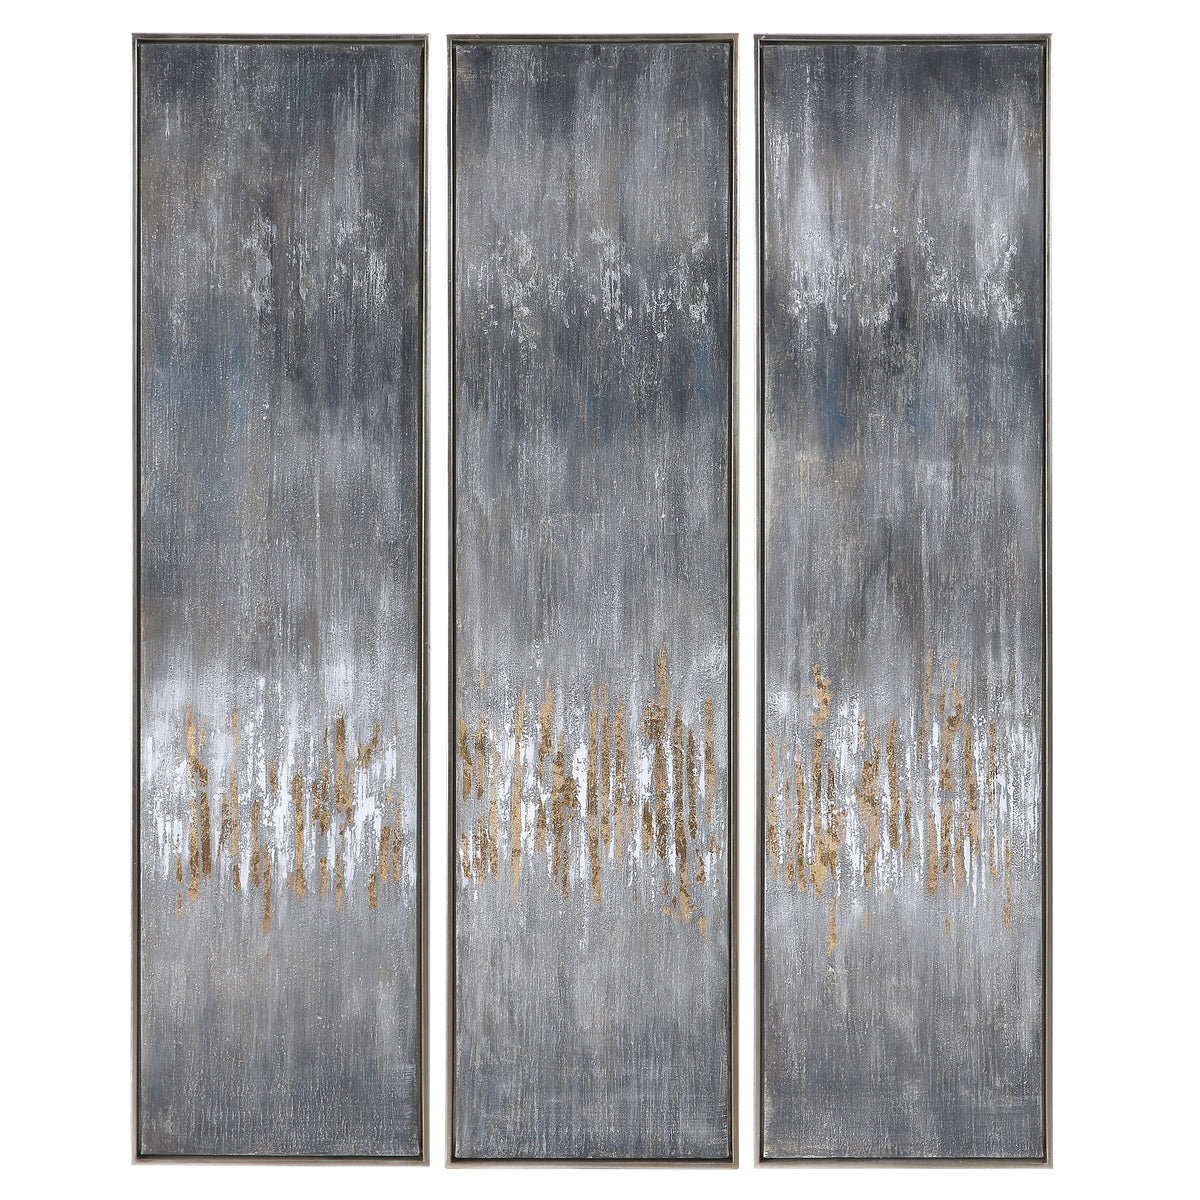 Gray Showers Hand Painted Canvases, S/3